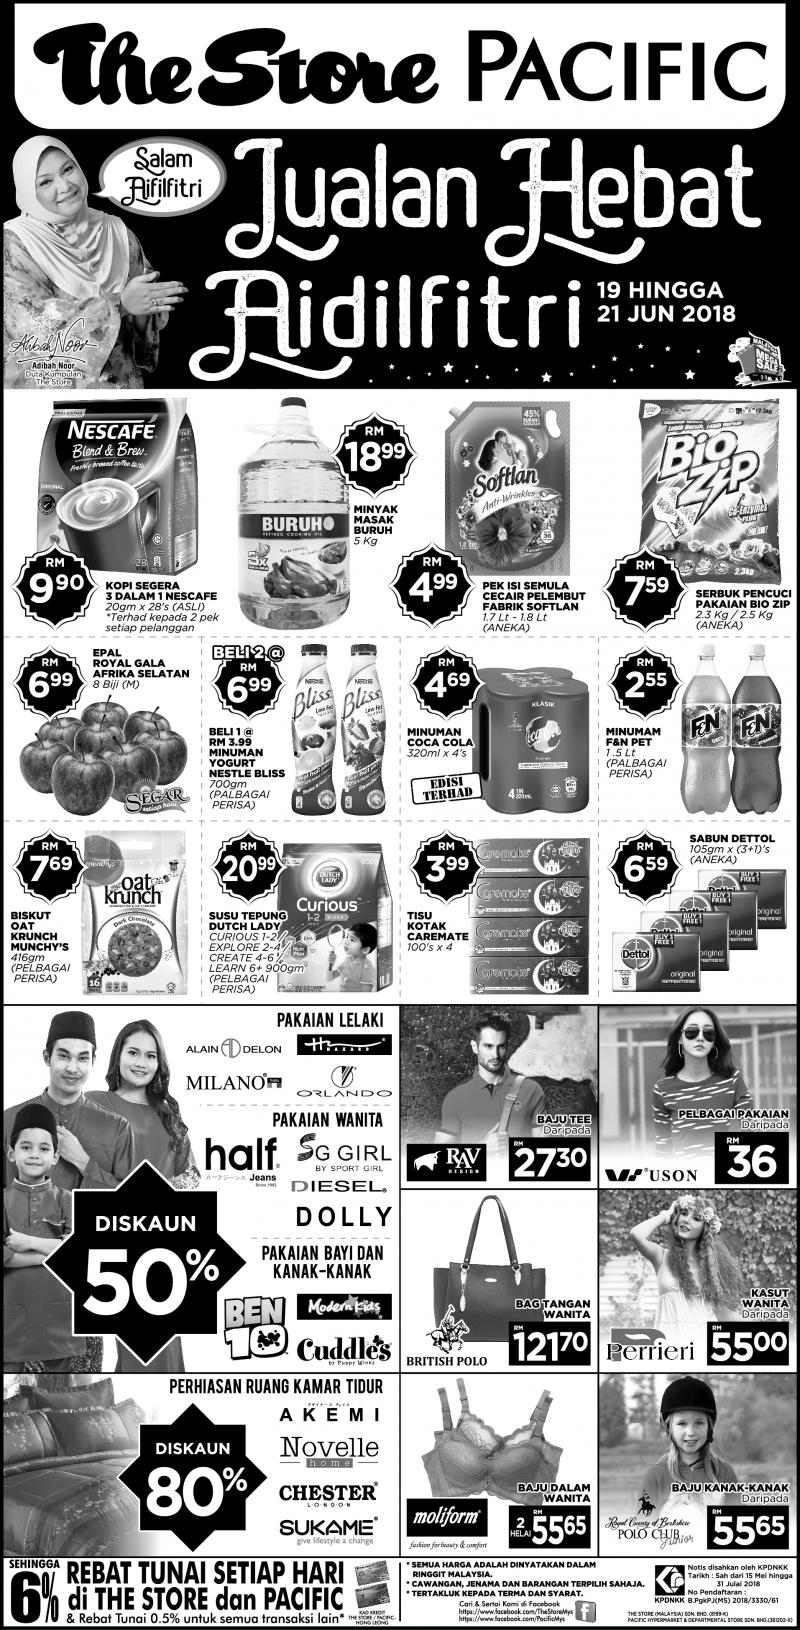 The Store and Pacific Hypermarket Aidilfitri Promotion (19 June 2018 - 21 June 2018)